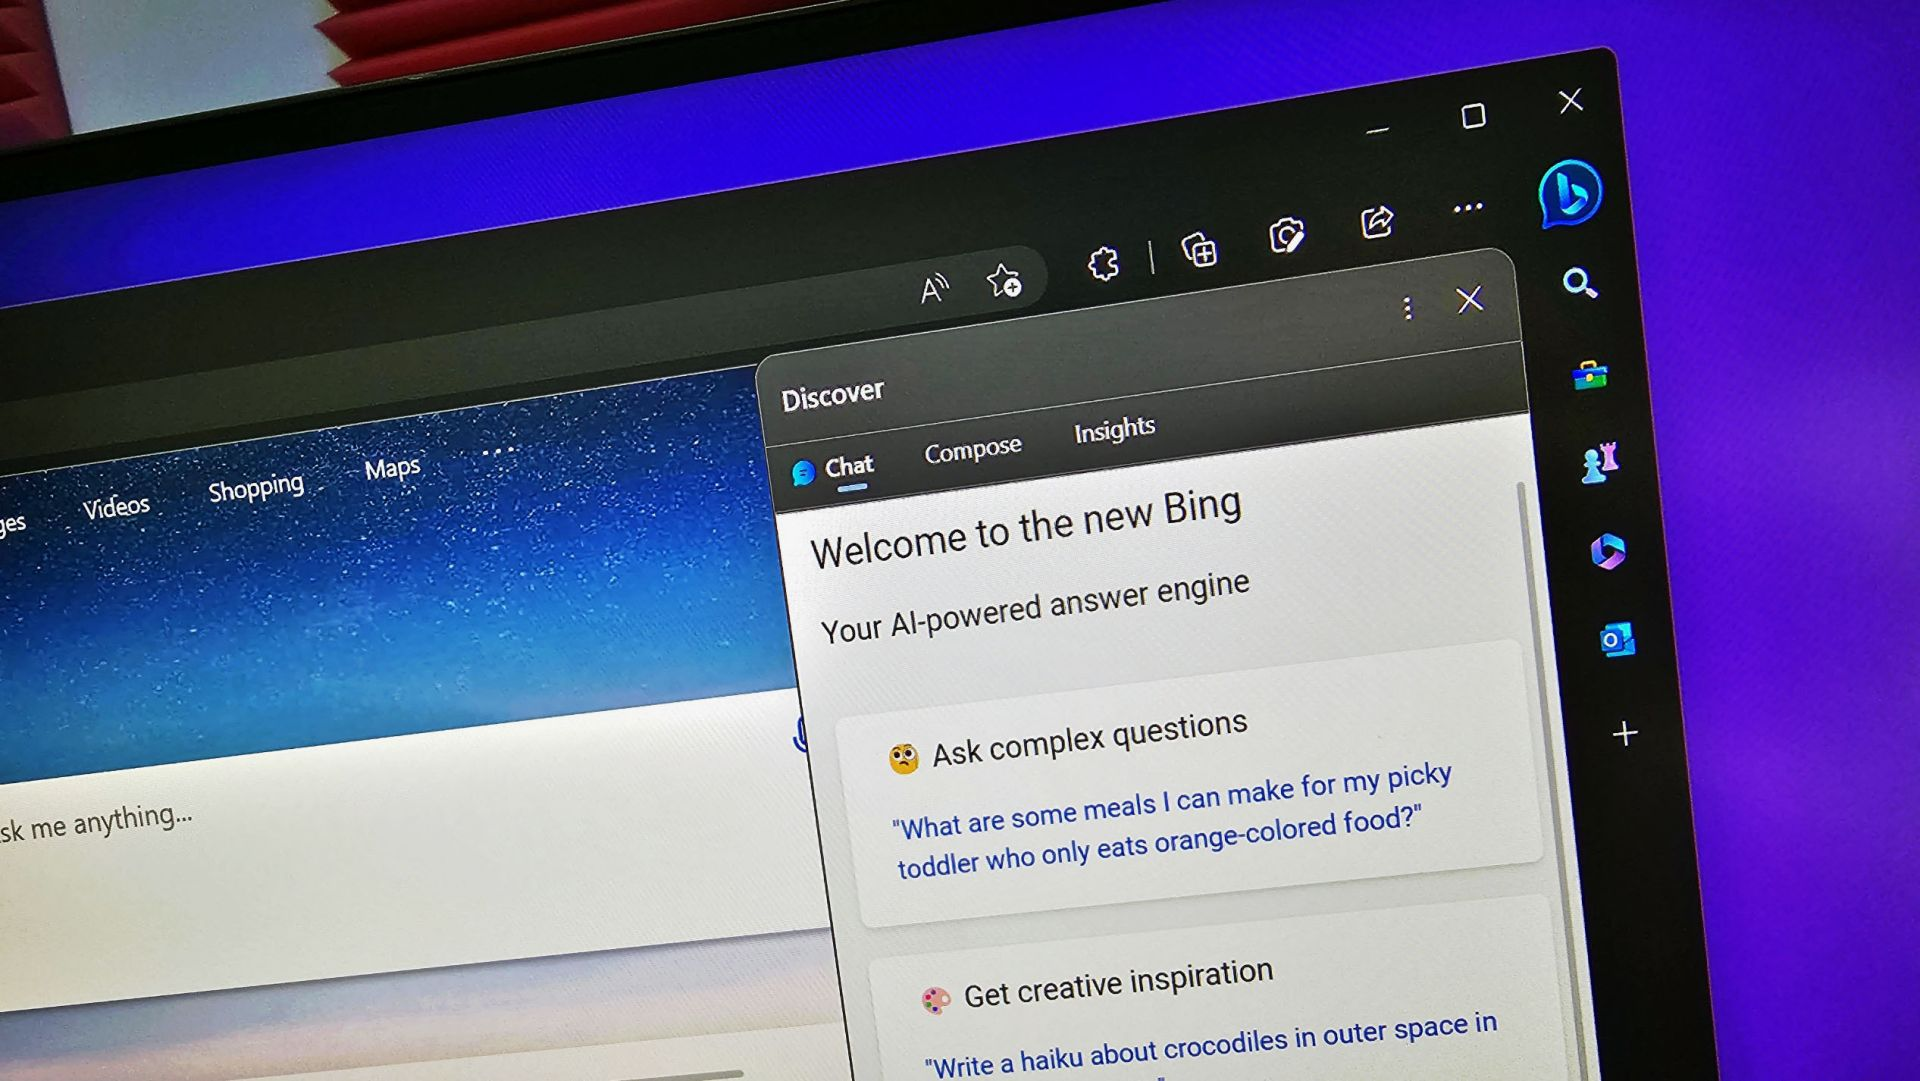 Can you earn Microsoft Rewards points by using the new Bing?